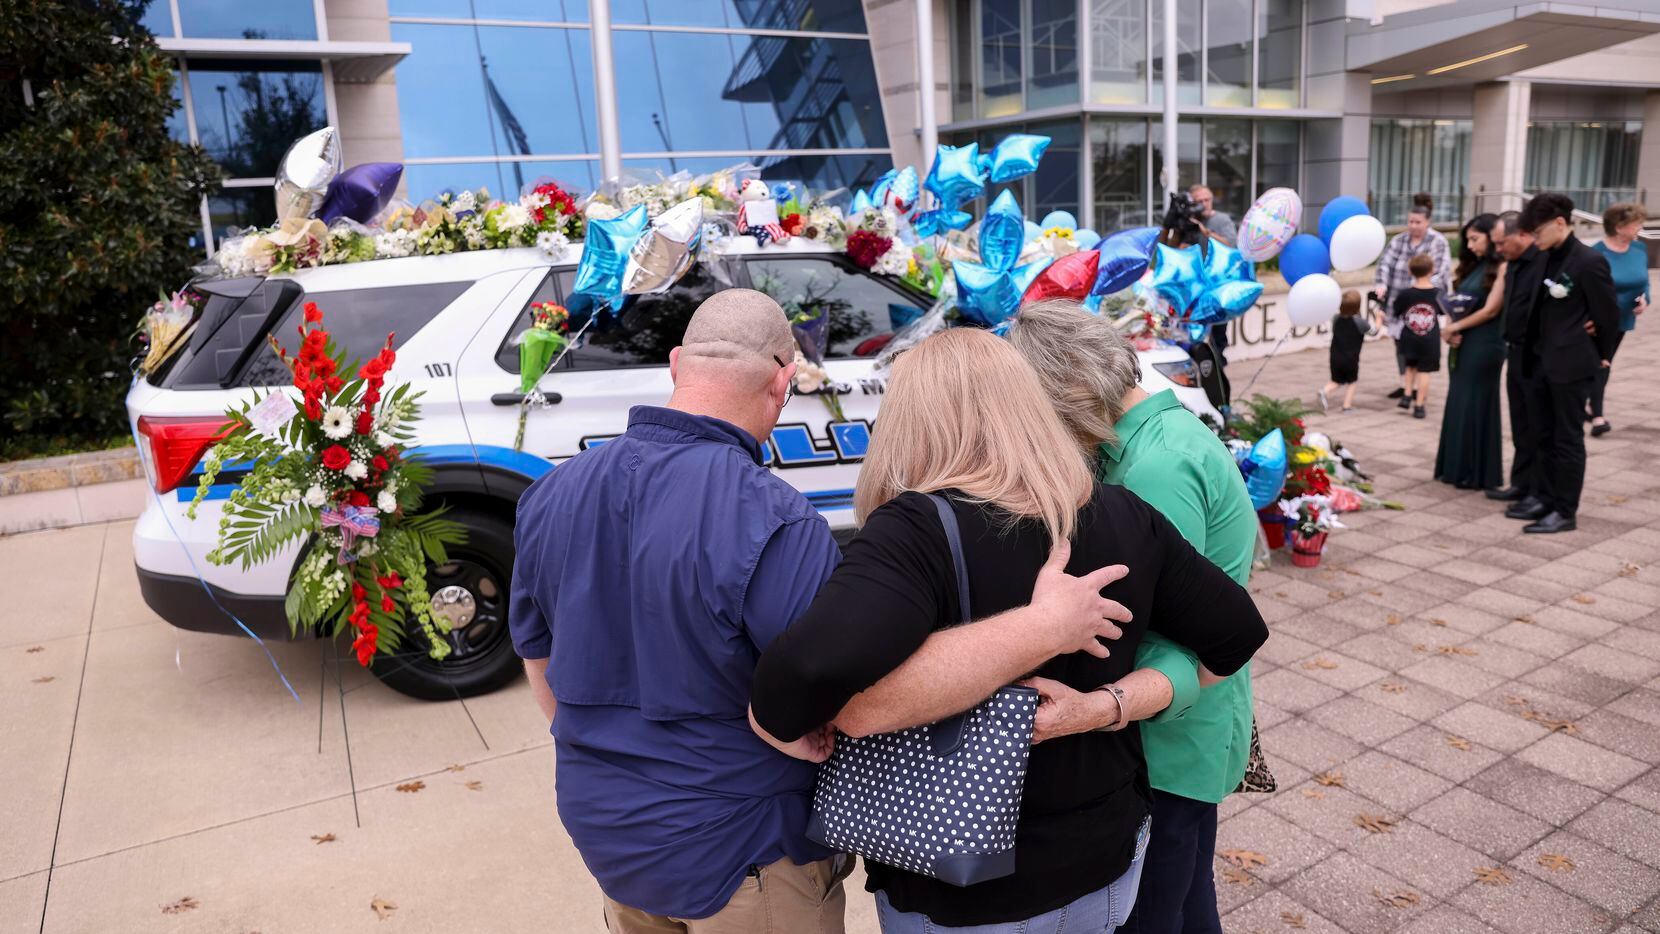 Dennis Nichols (from left) and Melissa Crosby, former elementary school classmates of slain Mesquite Officer Richard Lee Houston II, prayed Saturday with their third-grade teacher, Arlene Myers, in front of a memorial for Houston at the Mesquite Police Department.